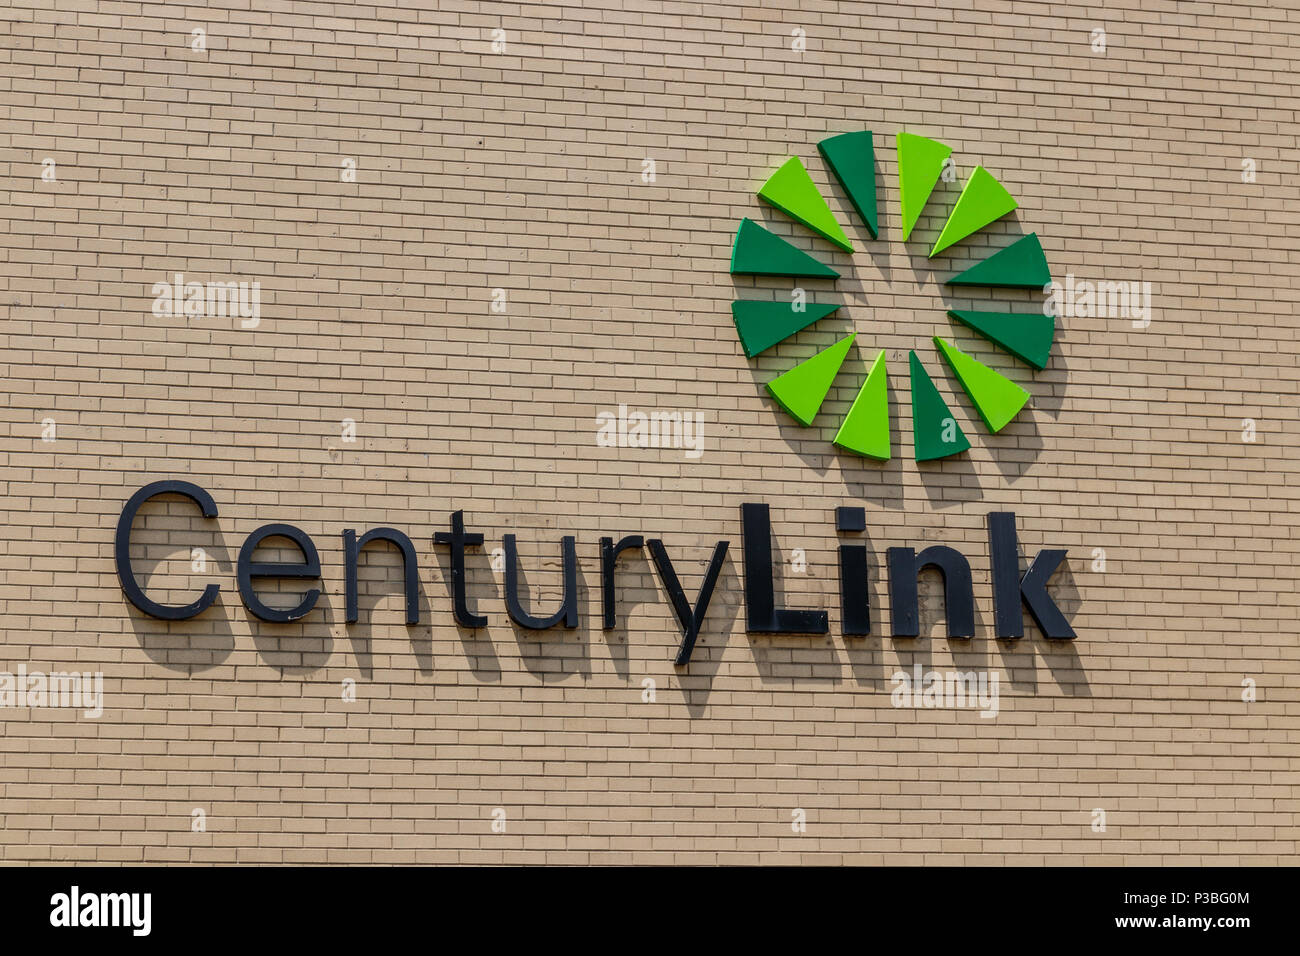 Monticello Circa June 2018 Centurylink Central Office Offers Data Services To Customers In 60 Countries V